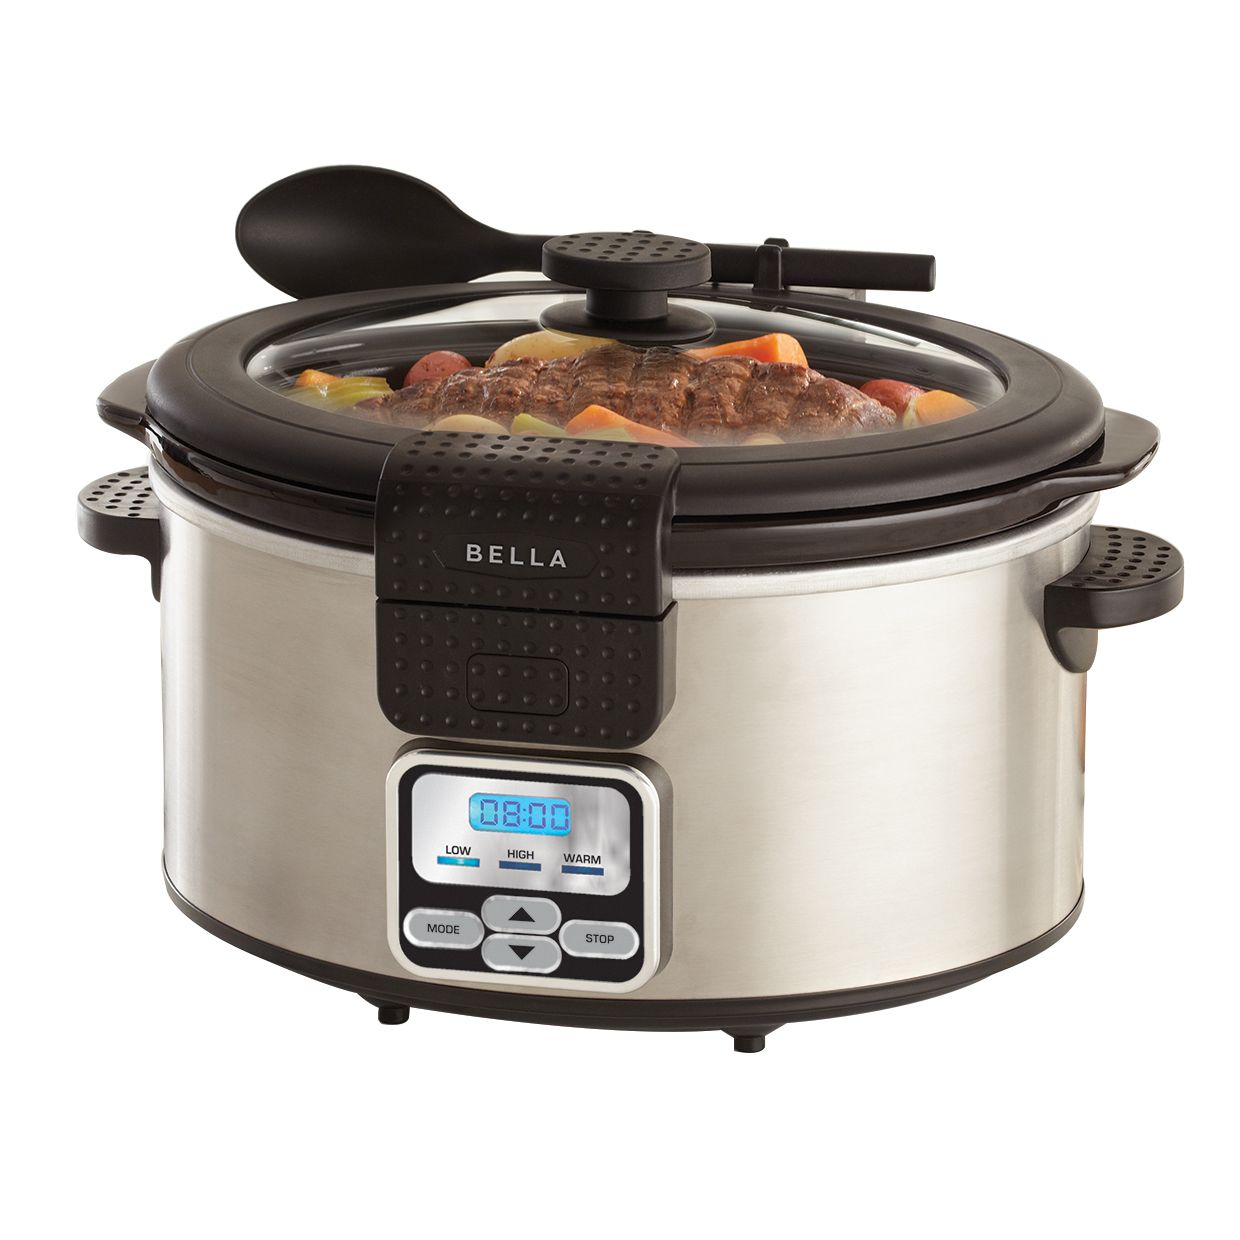 6-Quart Programmable Slow Cooker with Locking Lid, Stainless Steel